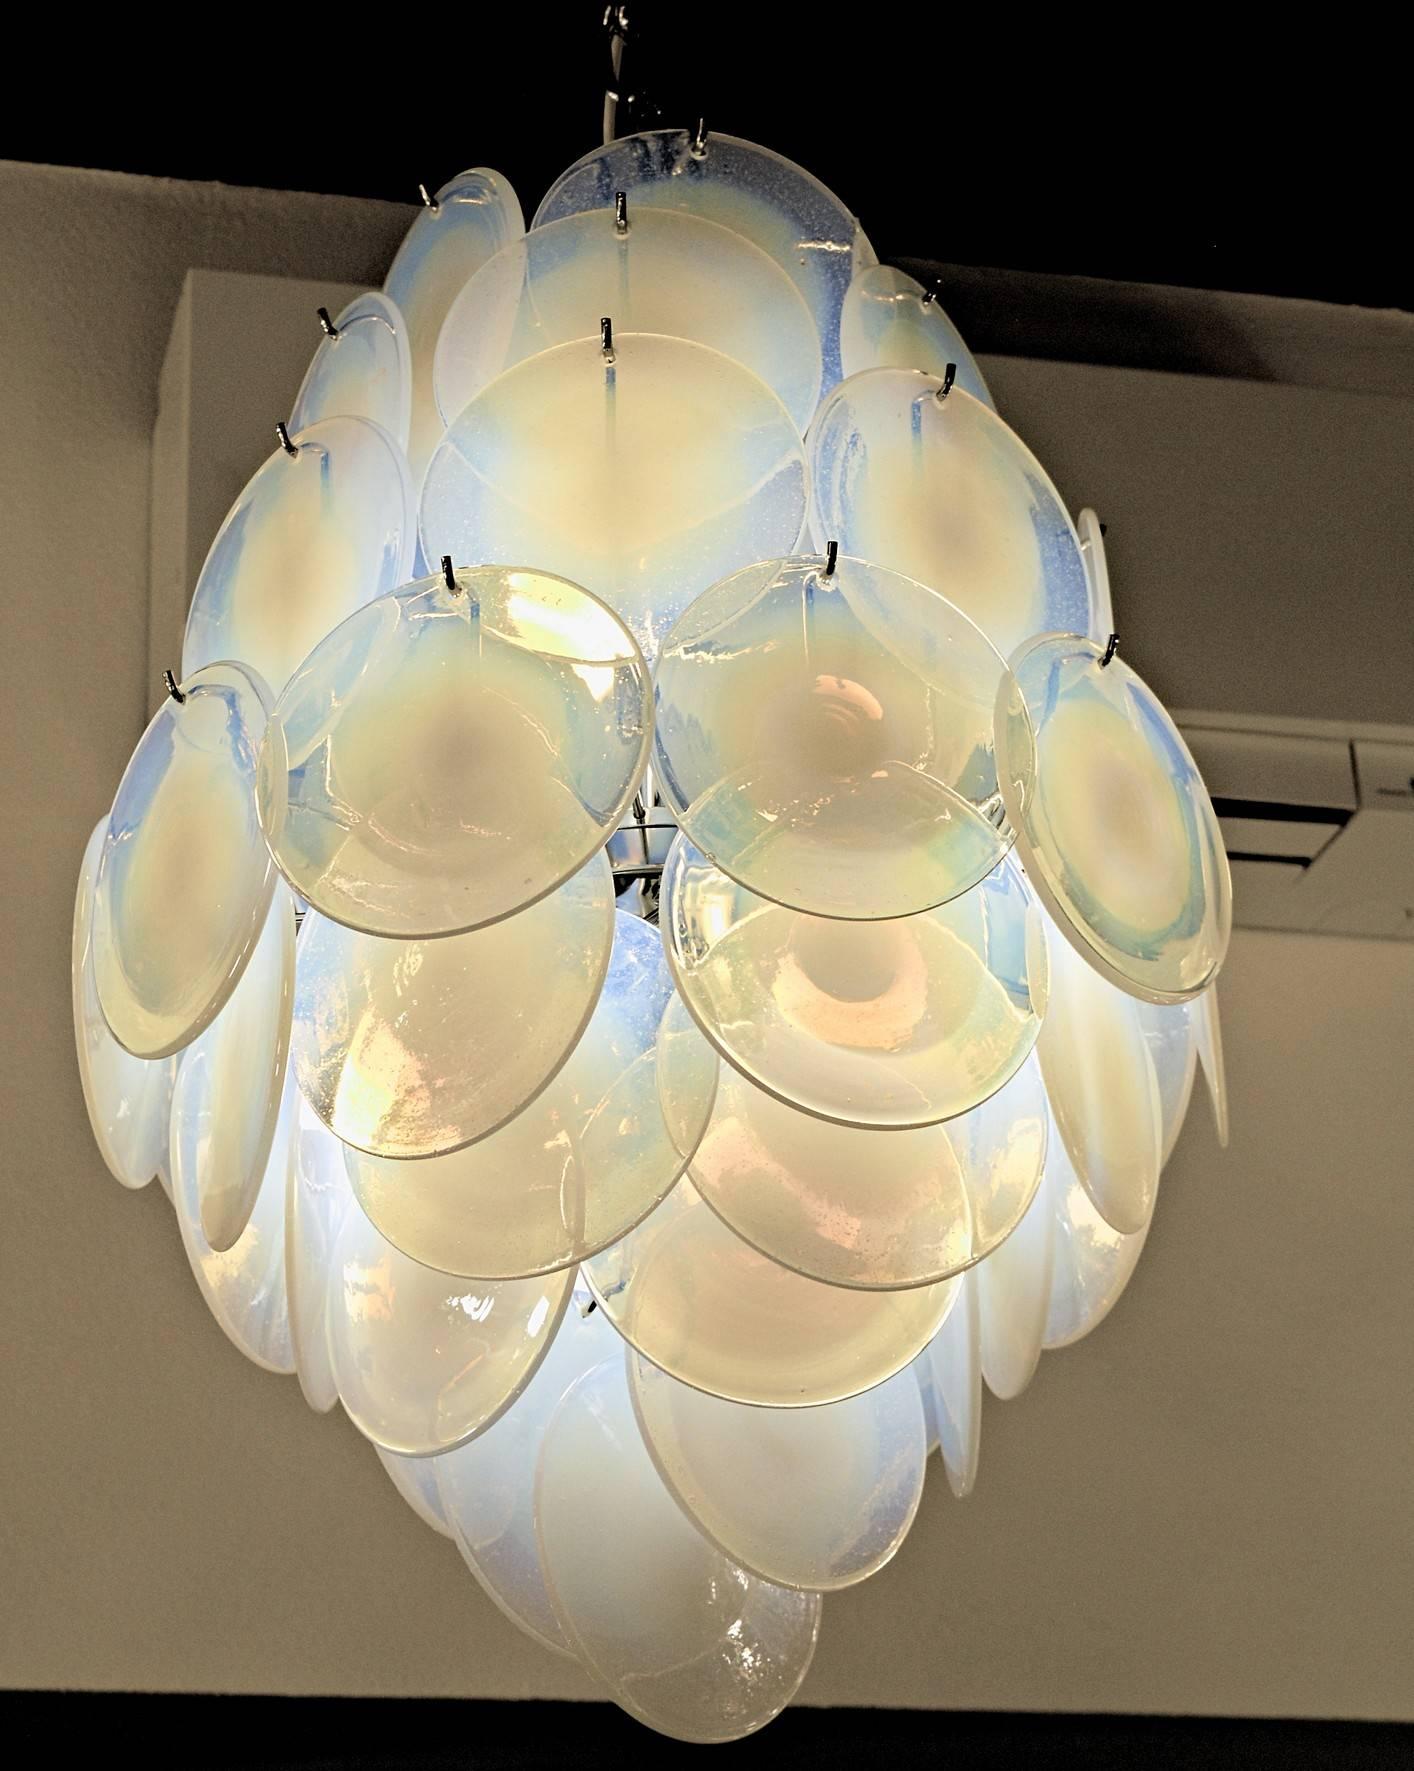 This beautiful chandelier carries 58 discs made with the rullati technique. The same technique was used to make Renaissance windows. Opaline color, a difficult color now not possible to produce, hand opened and flattened. Chrome hardware.

Carlo